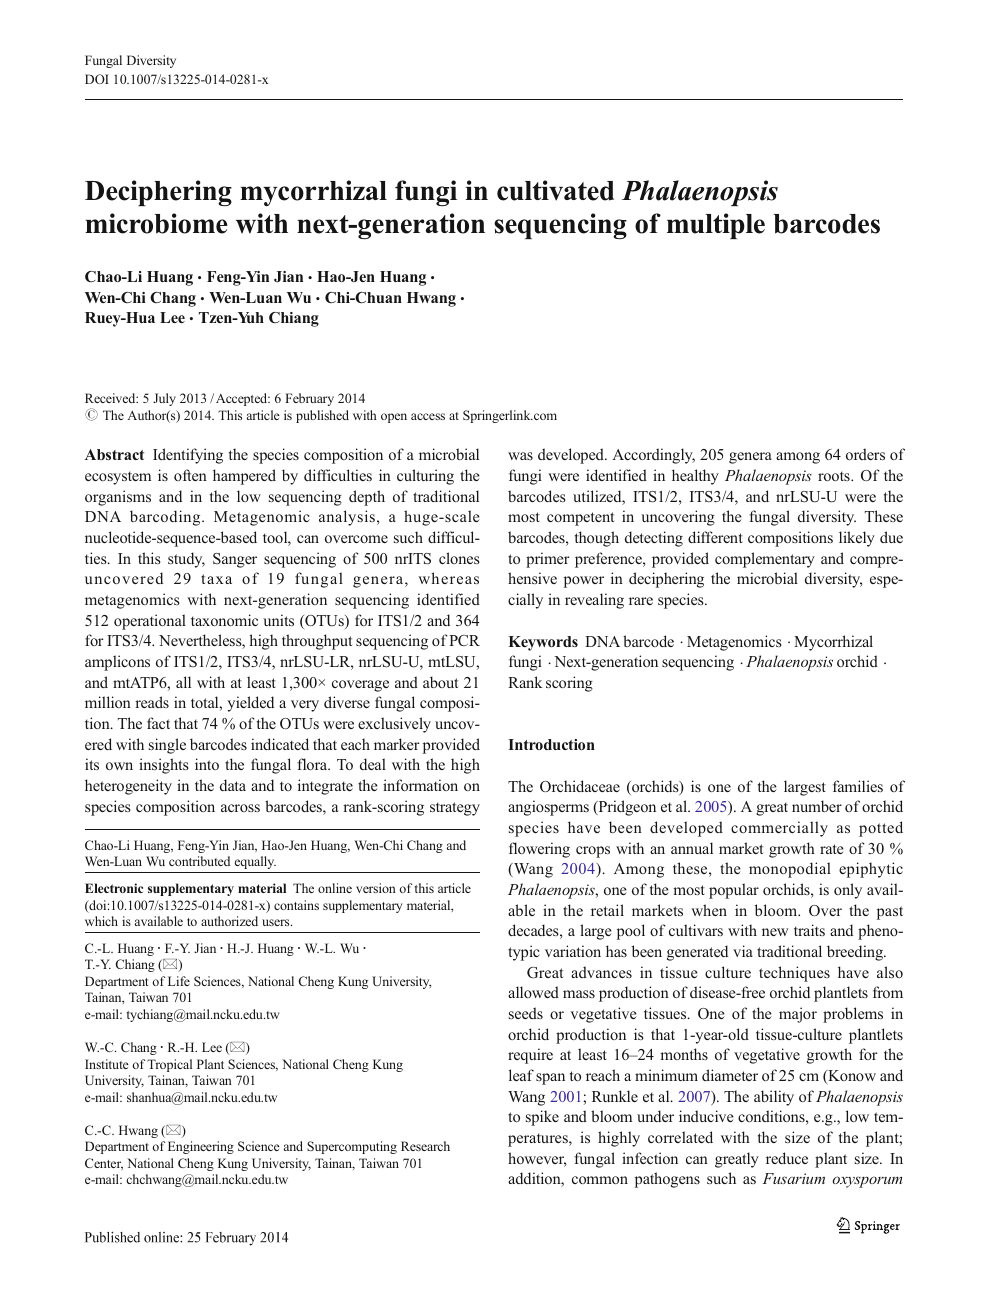 Deciphering Mycorrhizal Fungi In Cultivated Phalaenopsis Microbiome With Next Generation Sequencing Of Multiple Barcodes Topic Of Research Paper In Biological Sciences Download Scholarly Article Pdf And Read For Free On Cyberleninka Open